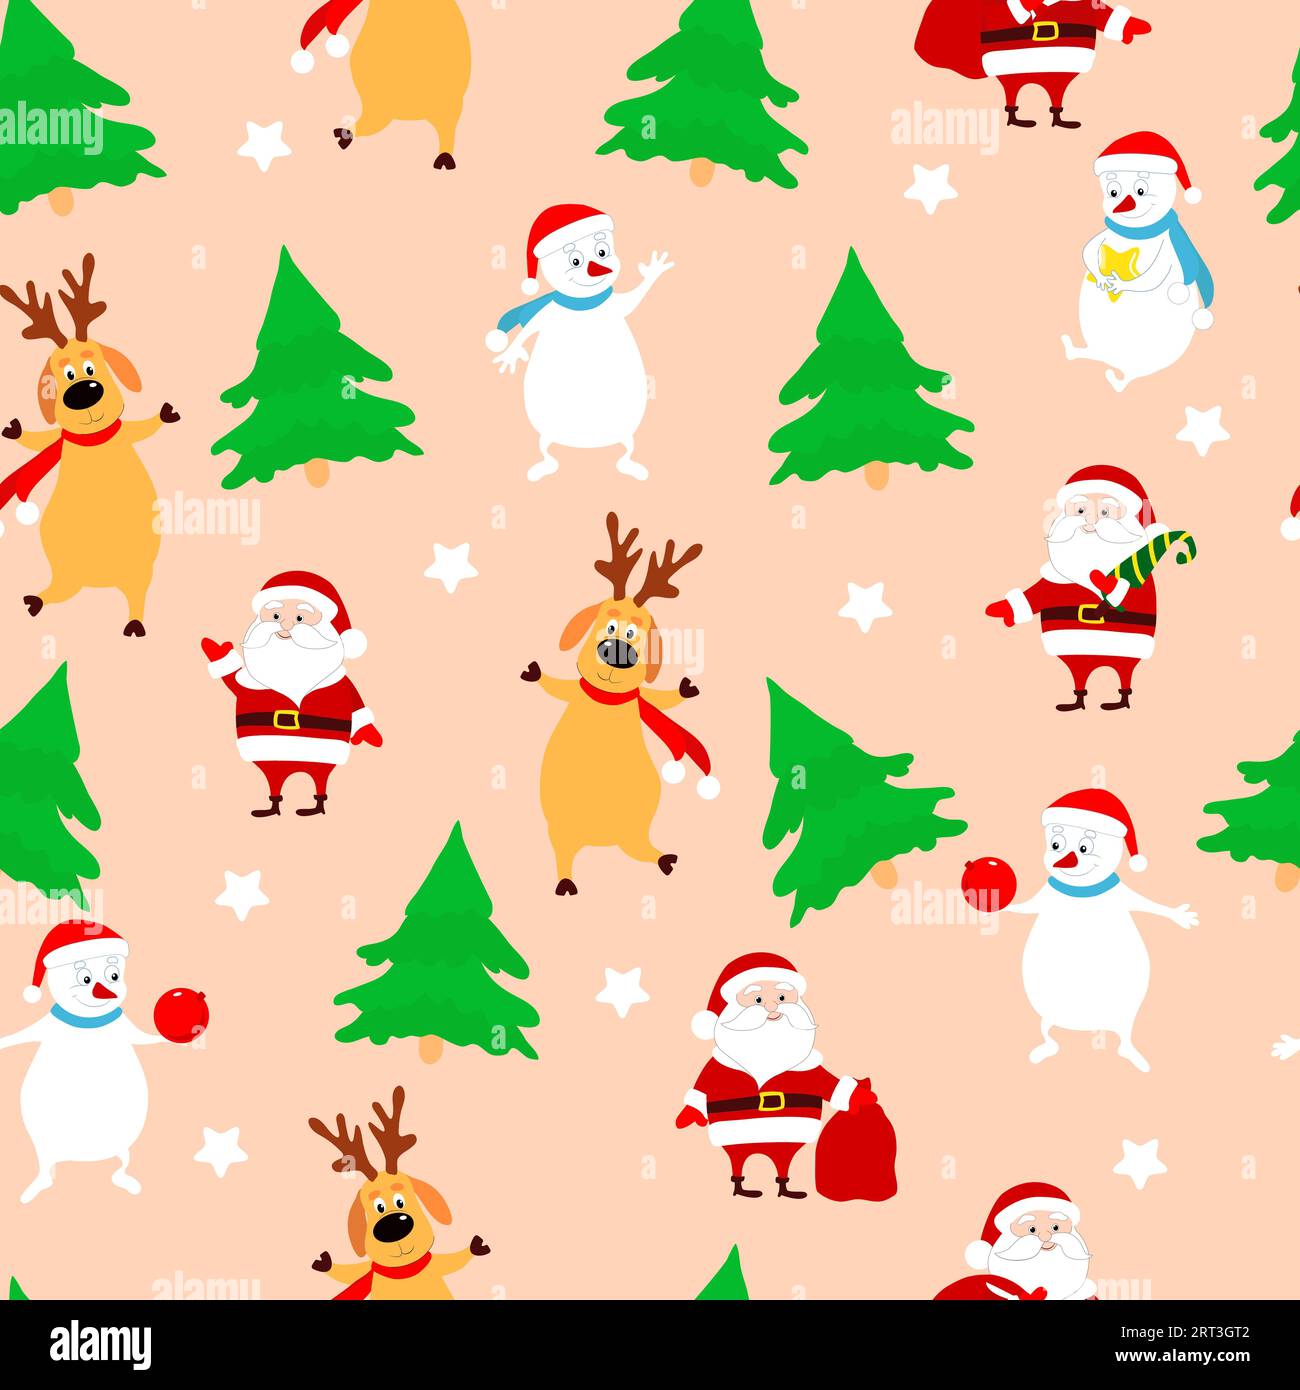 Seamless Christmas pattern fir, Santa Claus, snowmen, deers, white stars on a pink background. Pattern for packaging, for Christmas gifts. Stock Vector